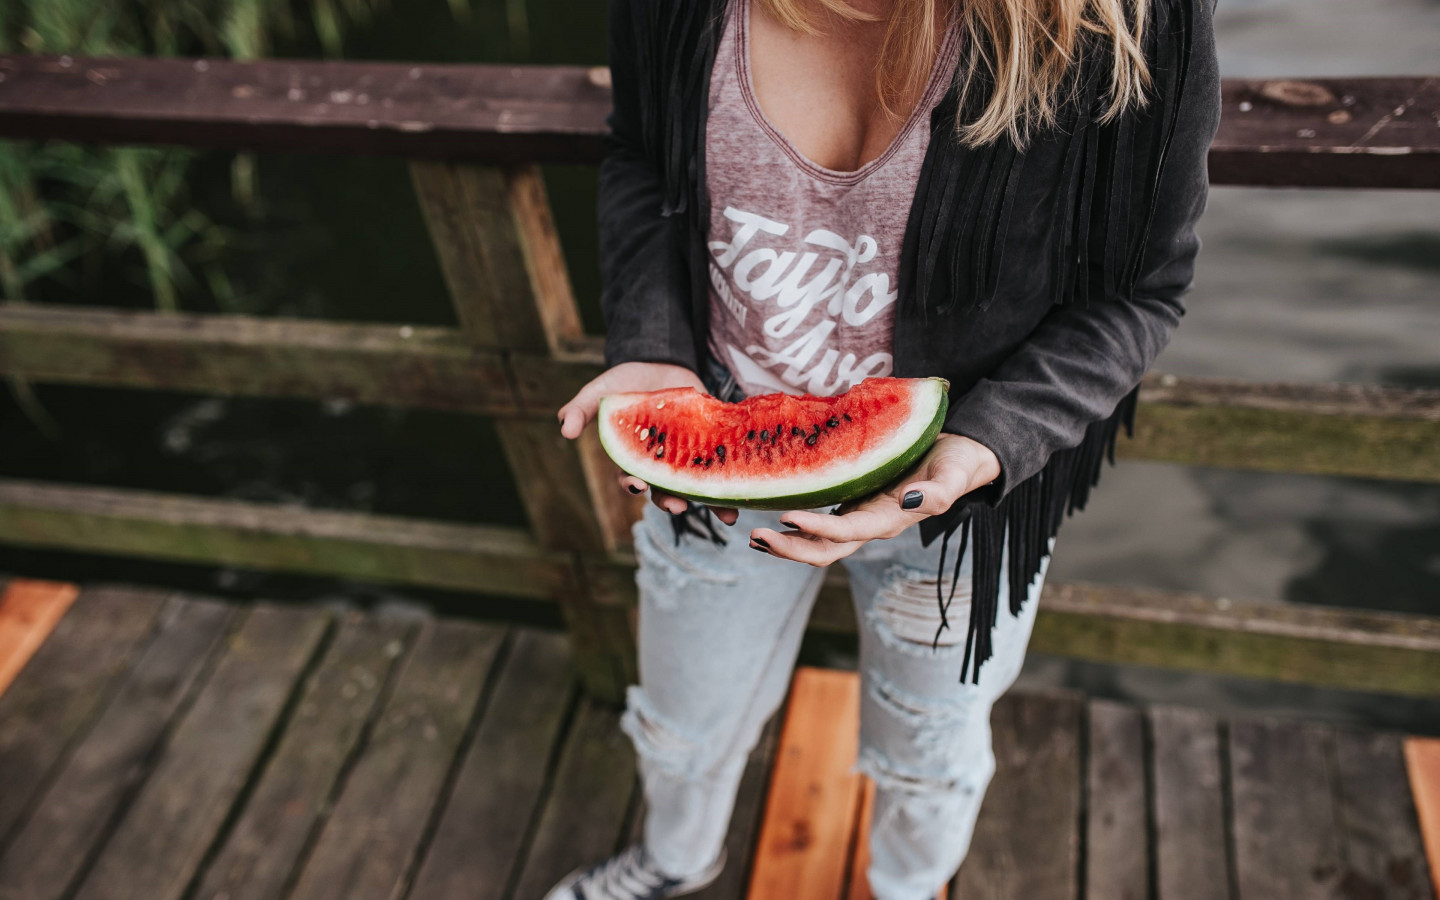 The girl with a watermelon slice wallpaper 1440x900